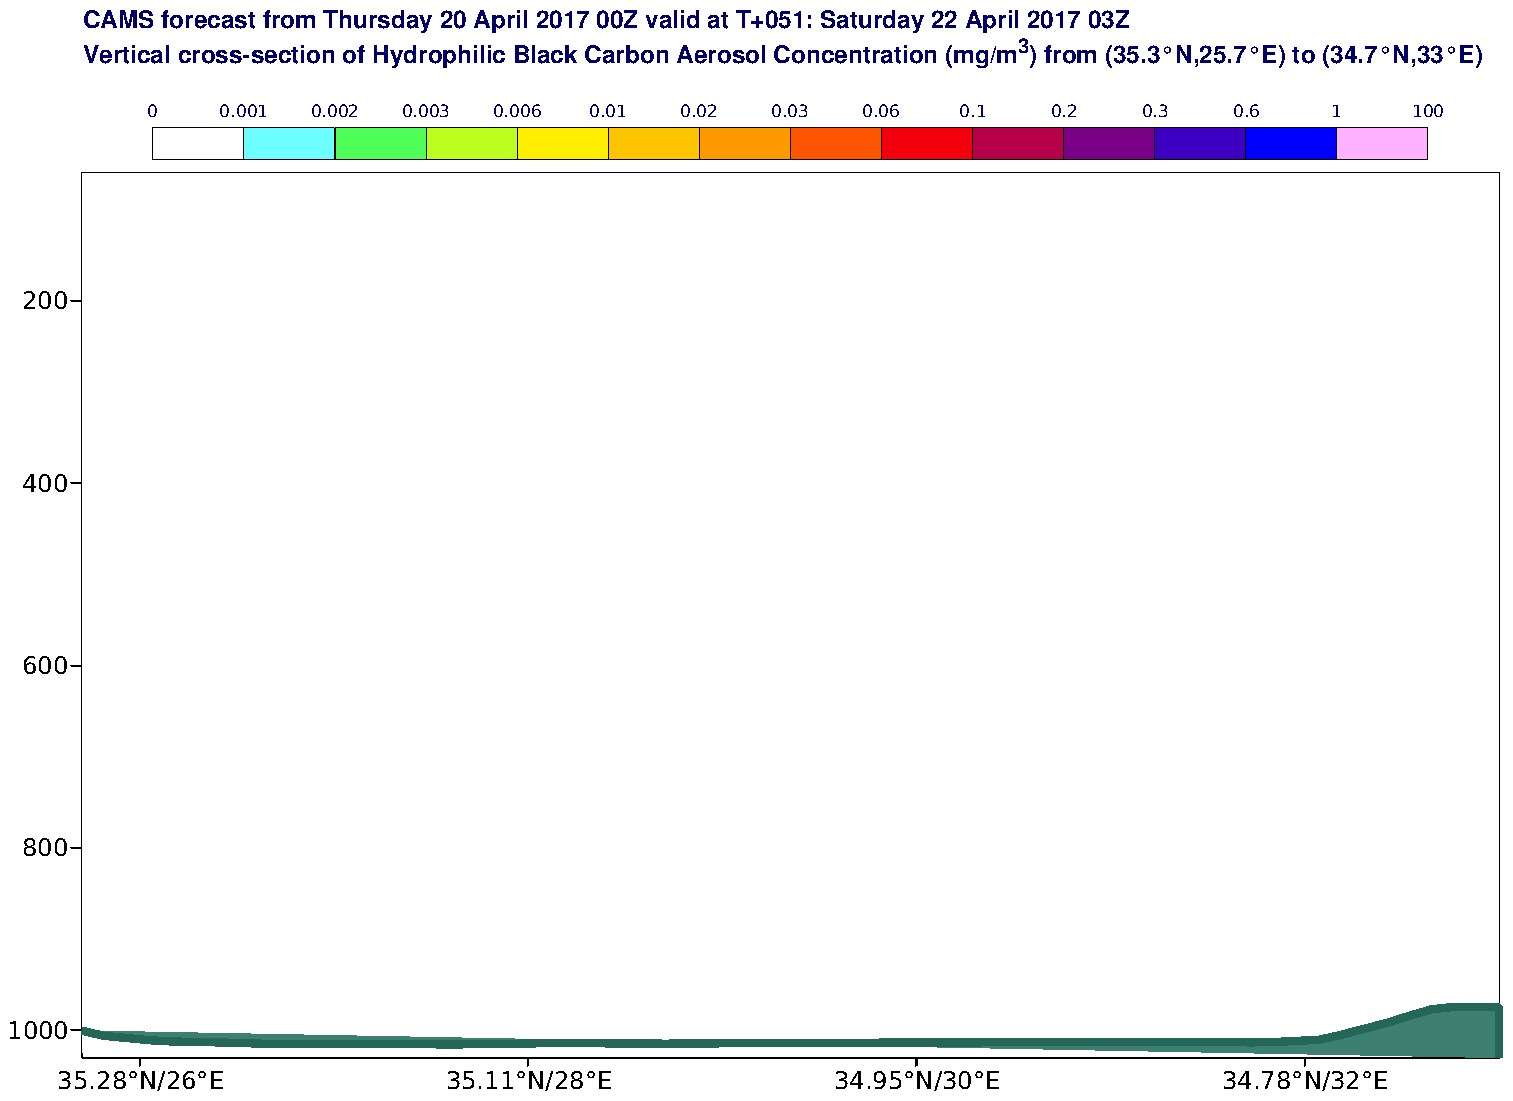 Vertical cross-section of Hydrophilic Black Carbon Aerosol Concentration (mg/m3) valid at T51 - 2017-04-22 03:00